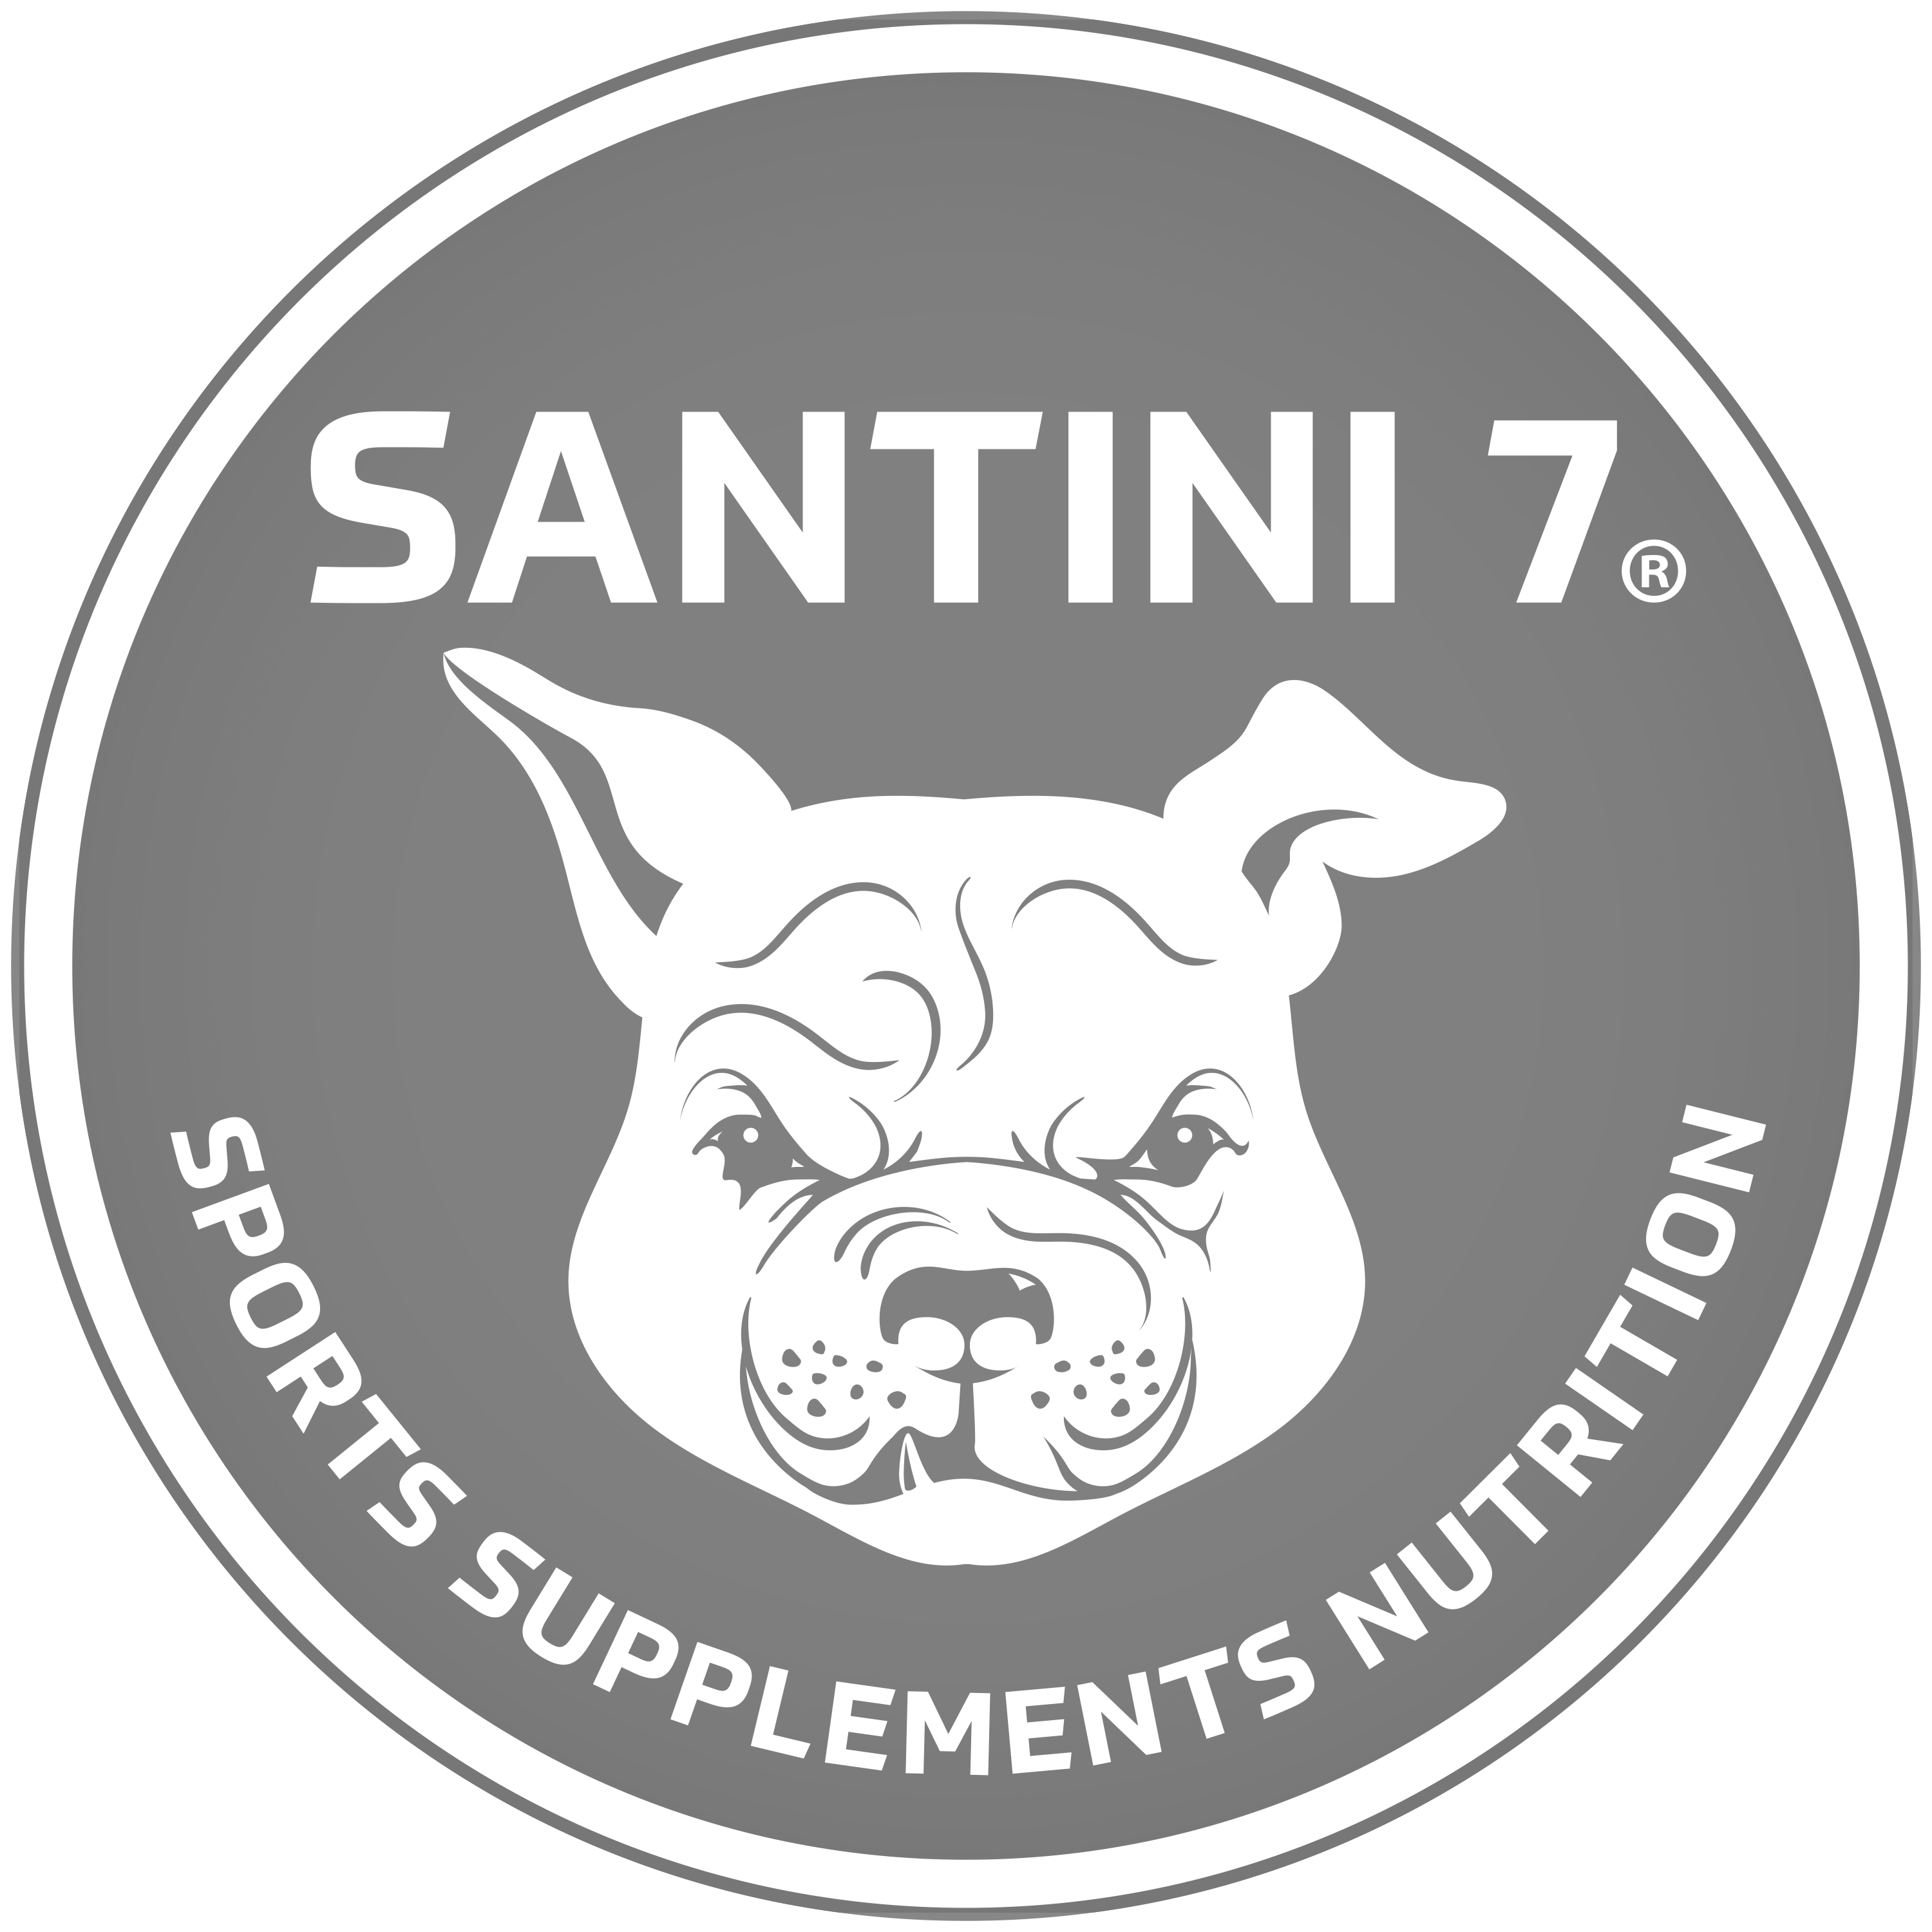 We're sponsored by Santini 7